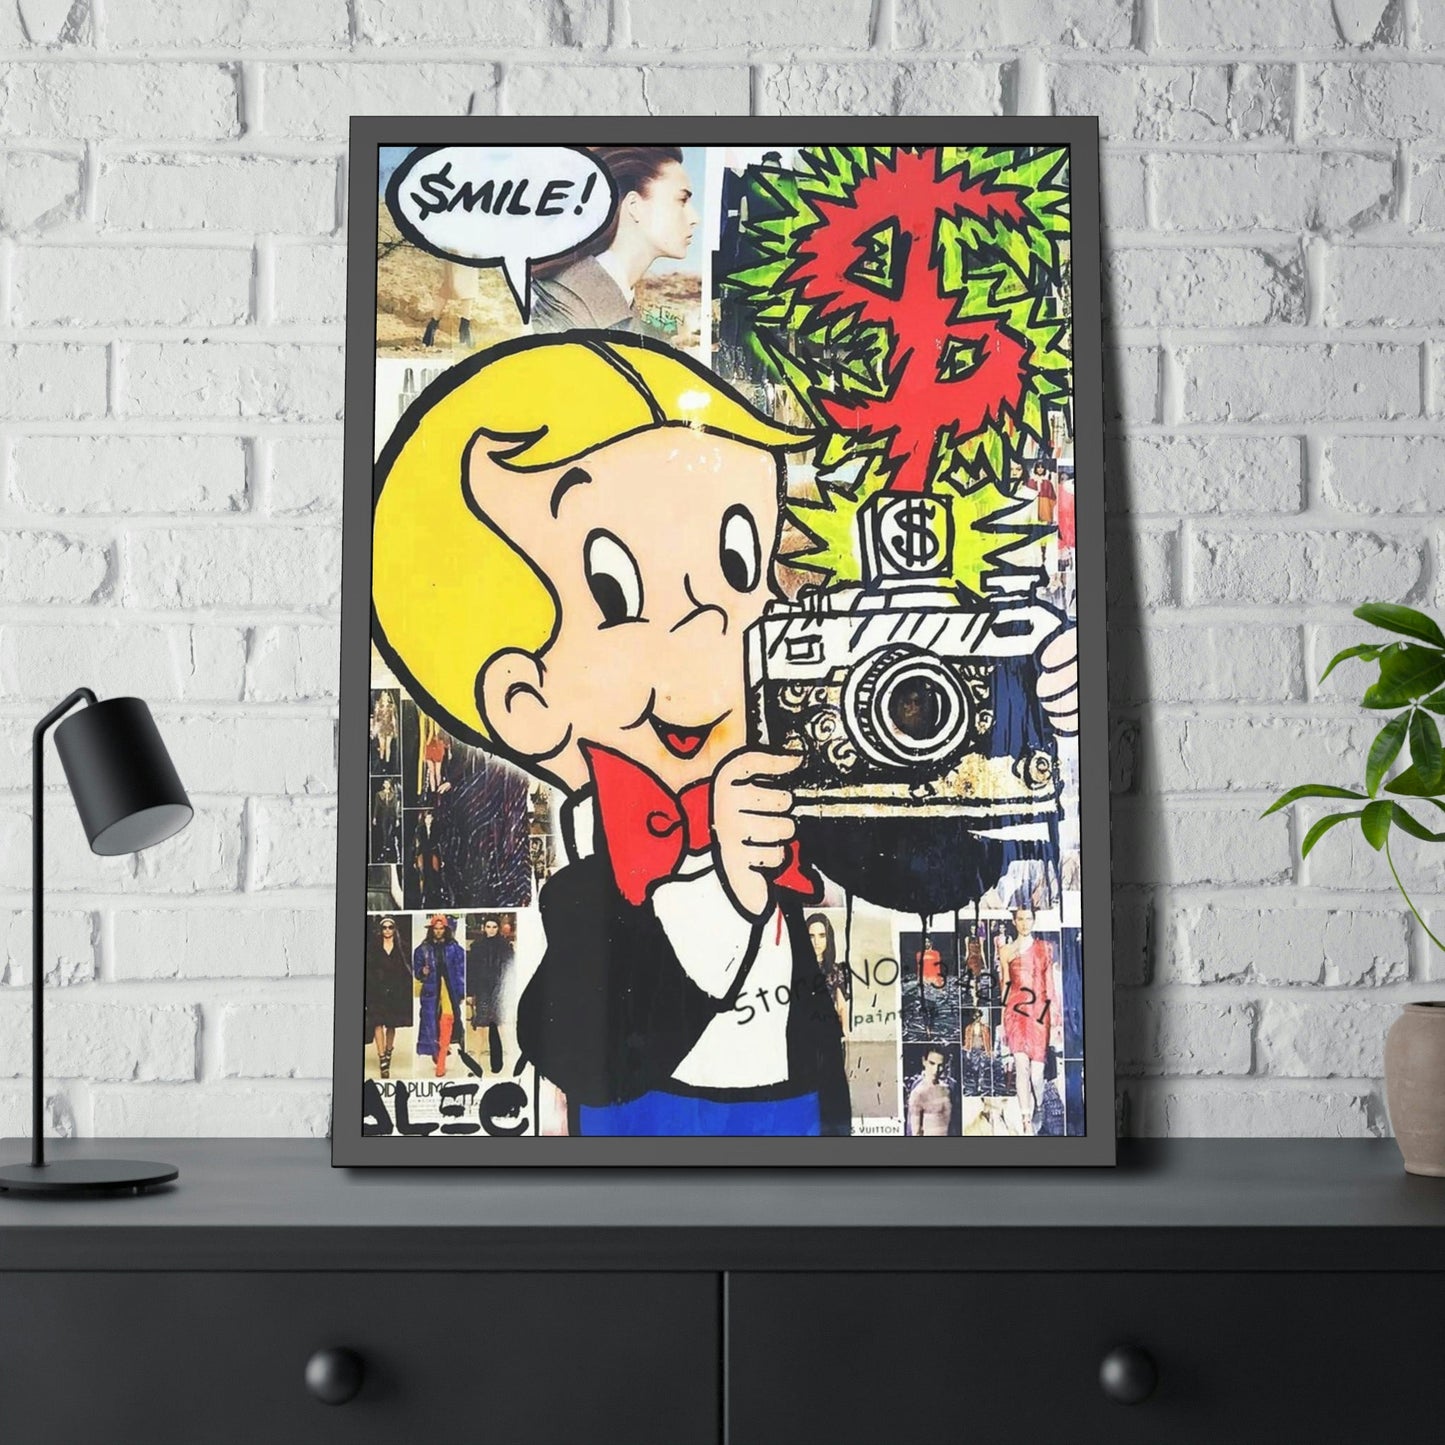 Colorful Wall Decor: Alec Monopoly's Art on Natural Canvas and Prints